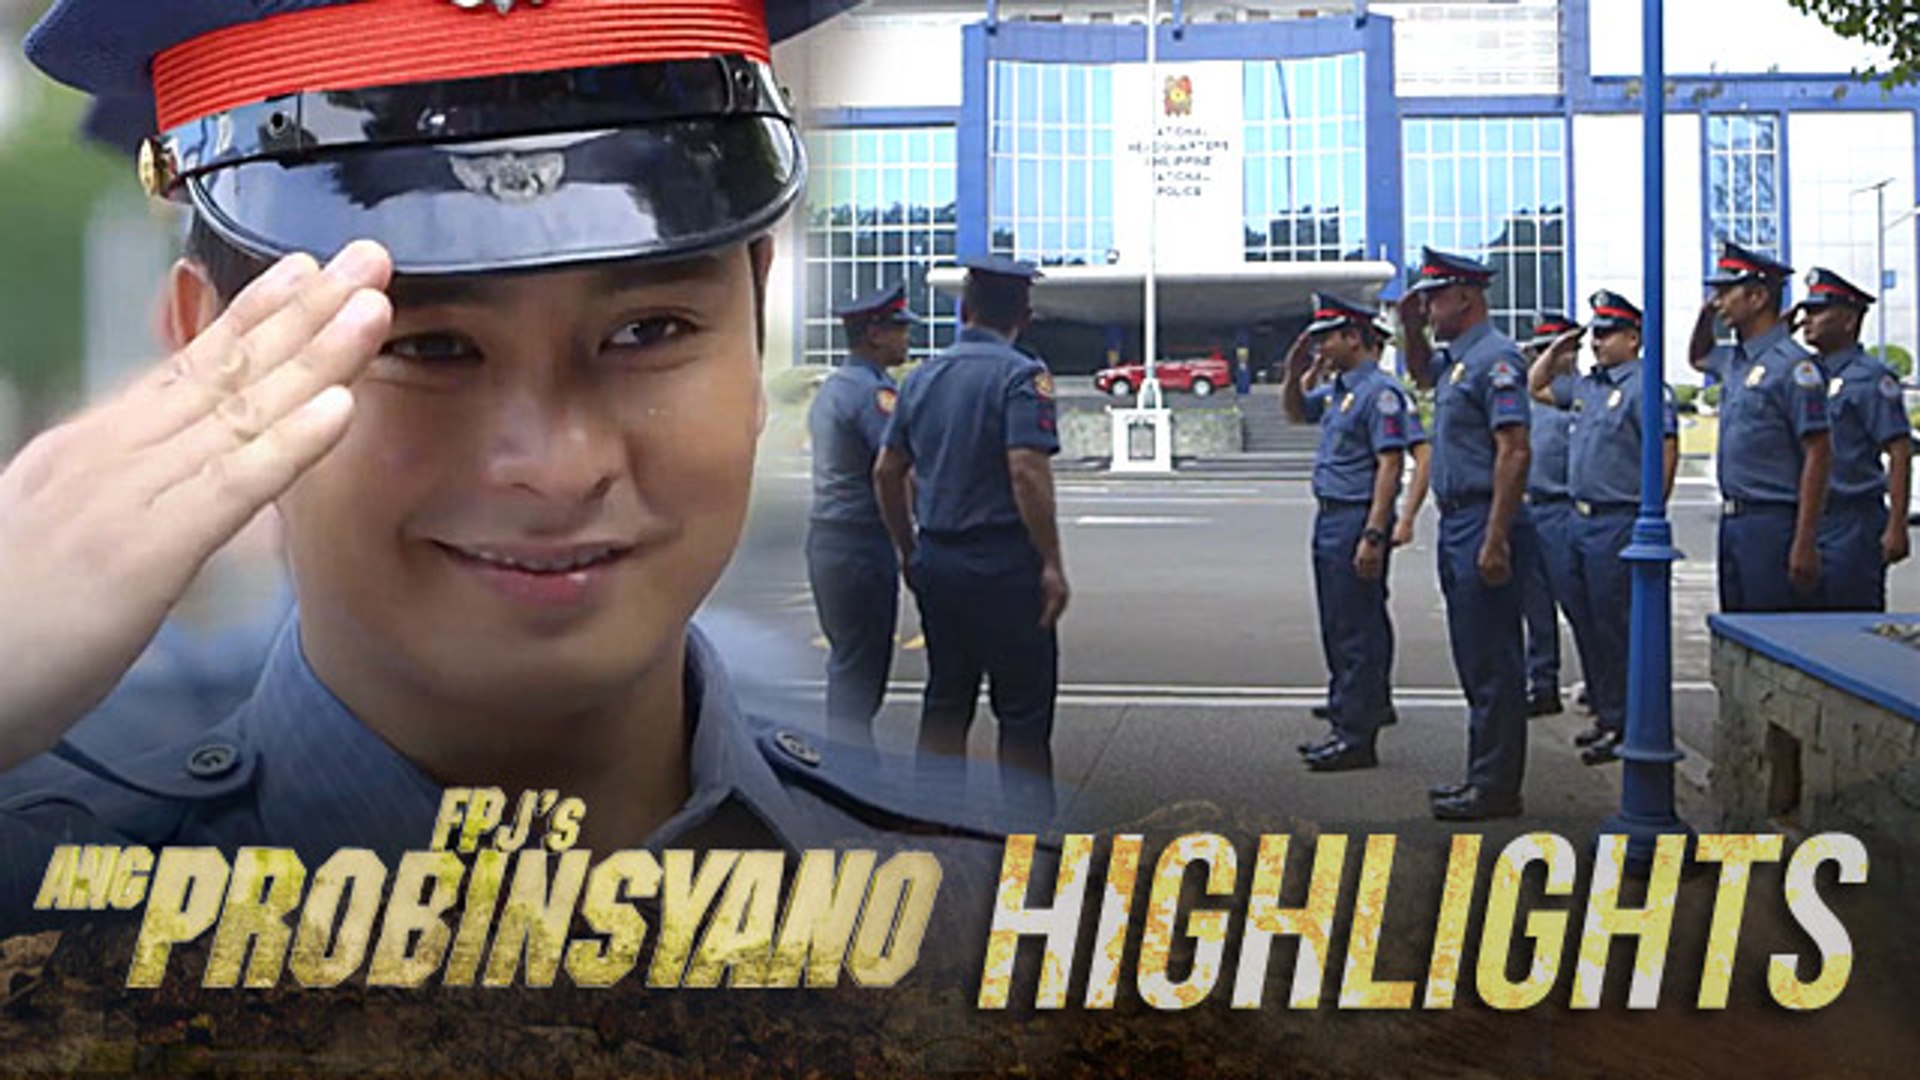 Cardo and Vendetta start their duty as police officers | FPJ's Ang Probinsyano